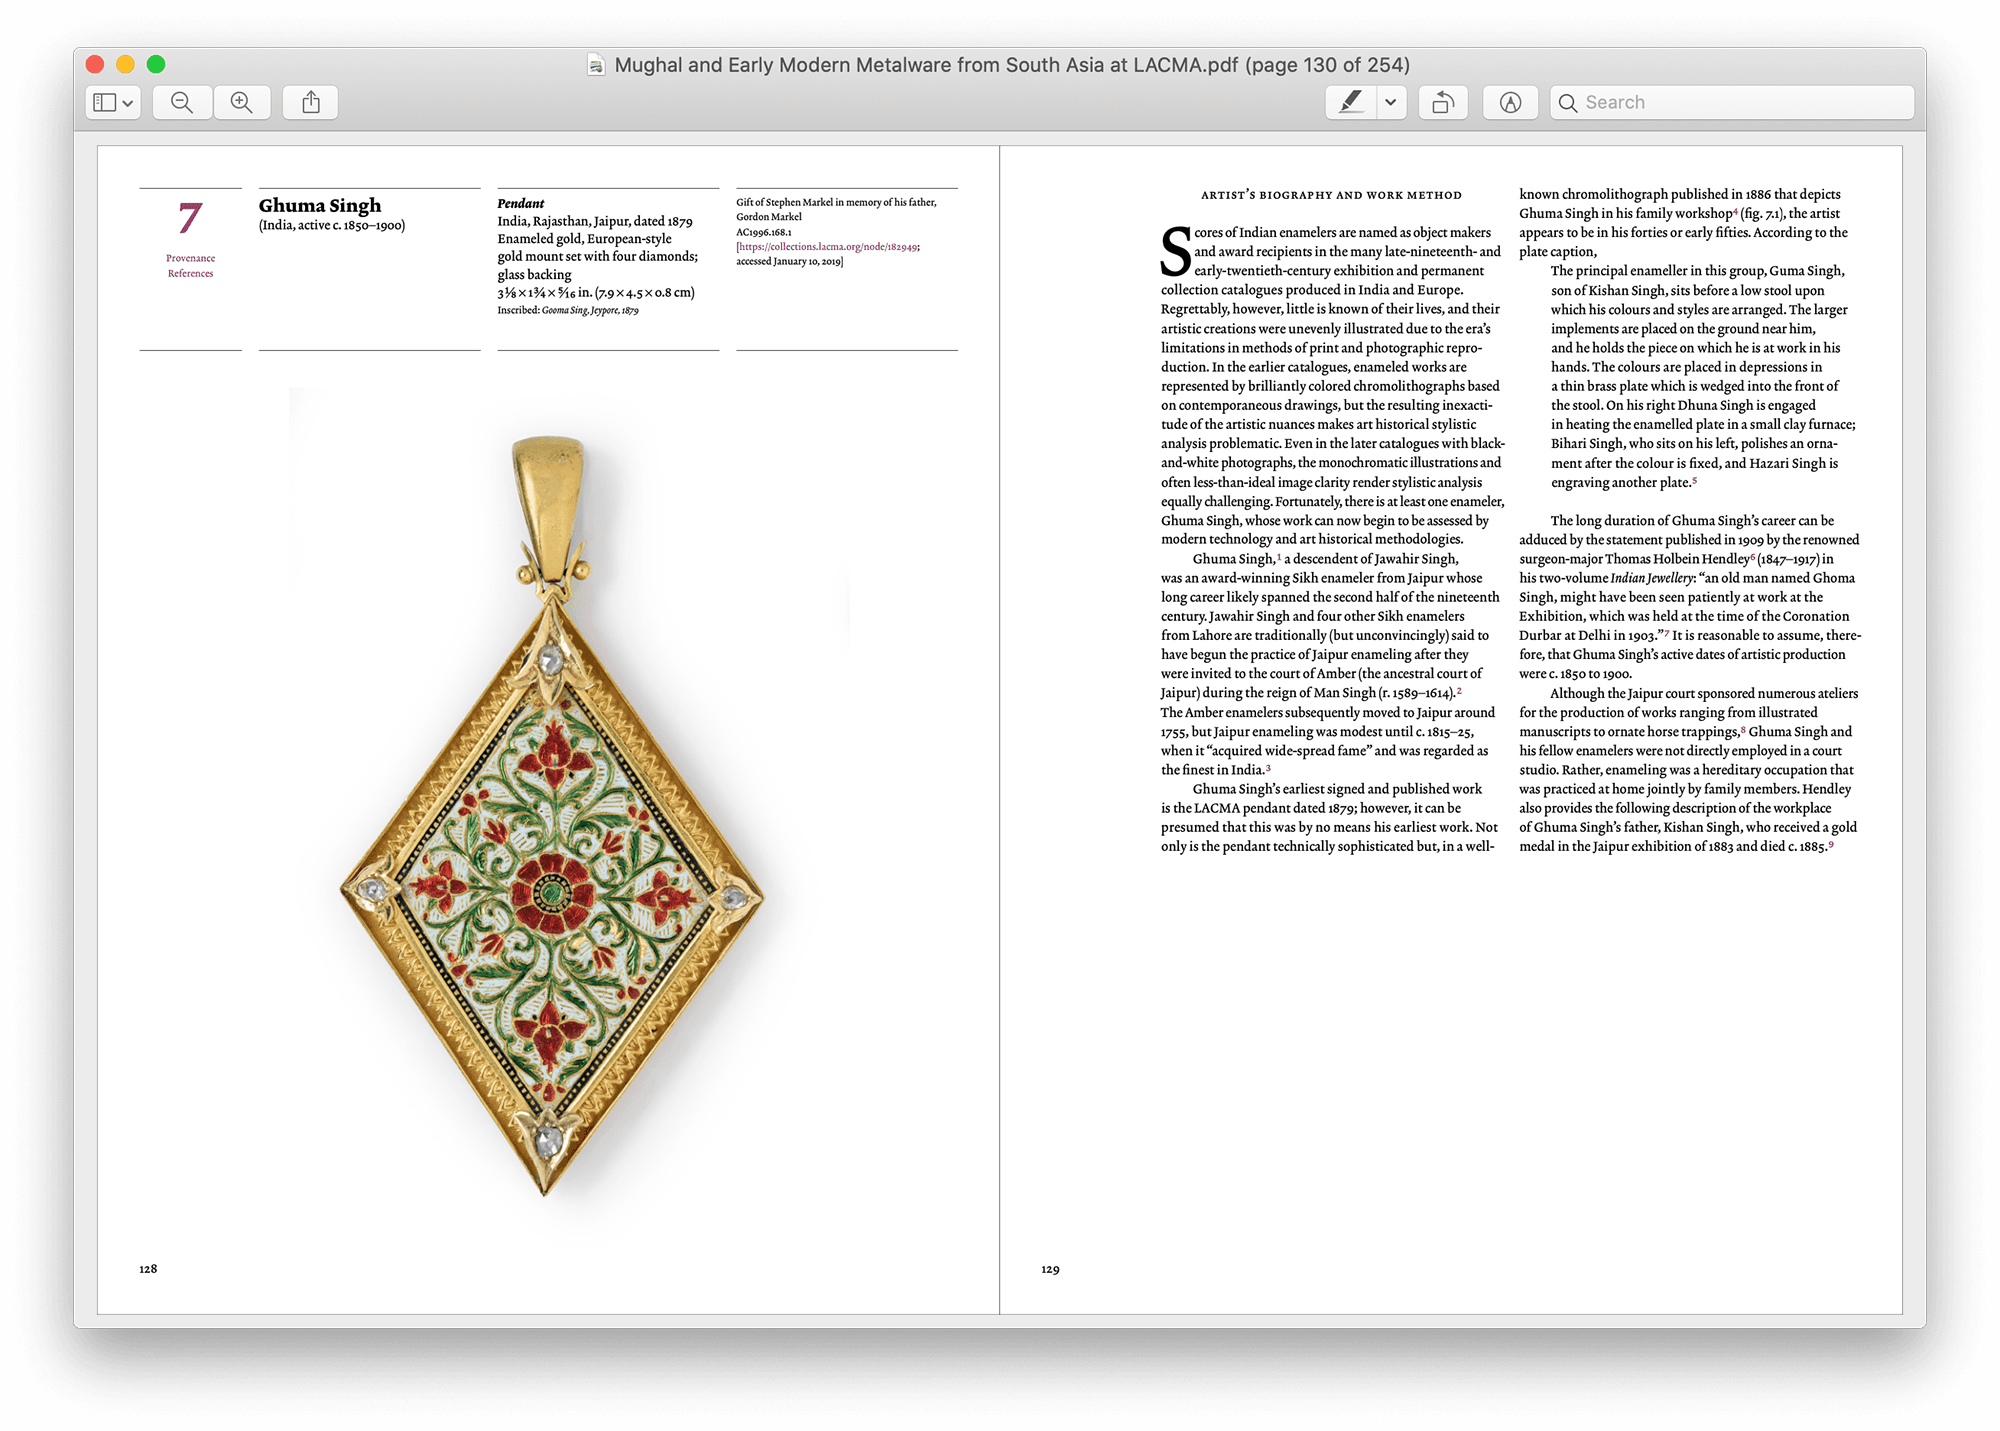 Mughal and Early Modern Metalware from South Asia at LACMA, 2021. Designed by Tommy Huang.